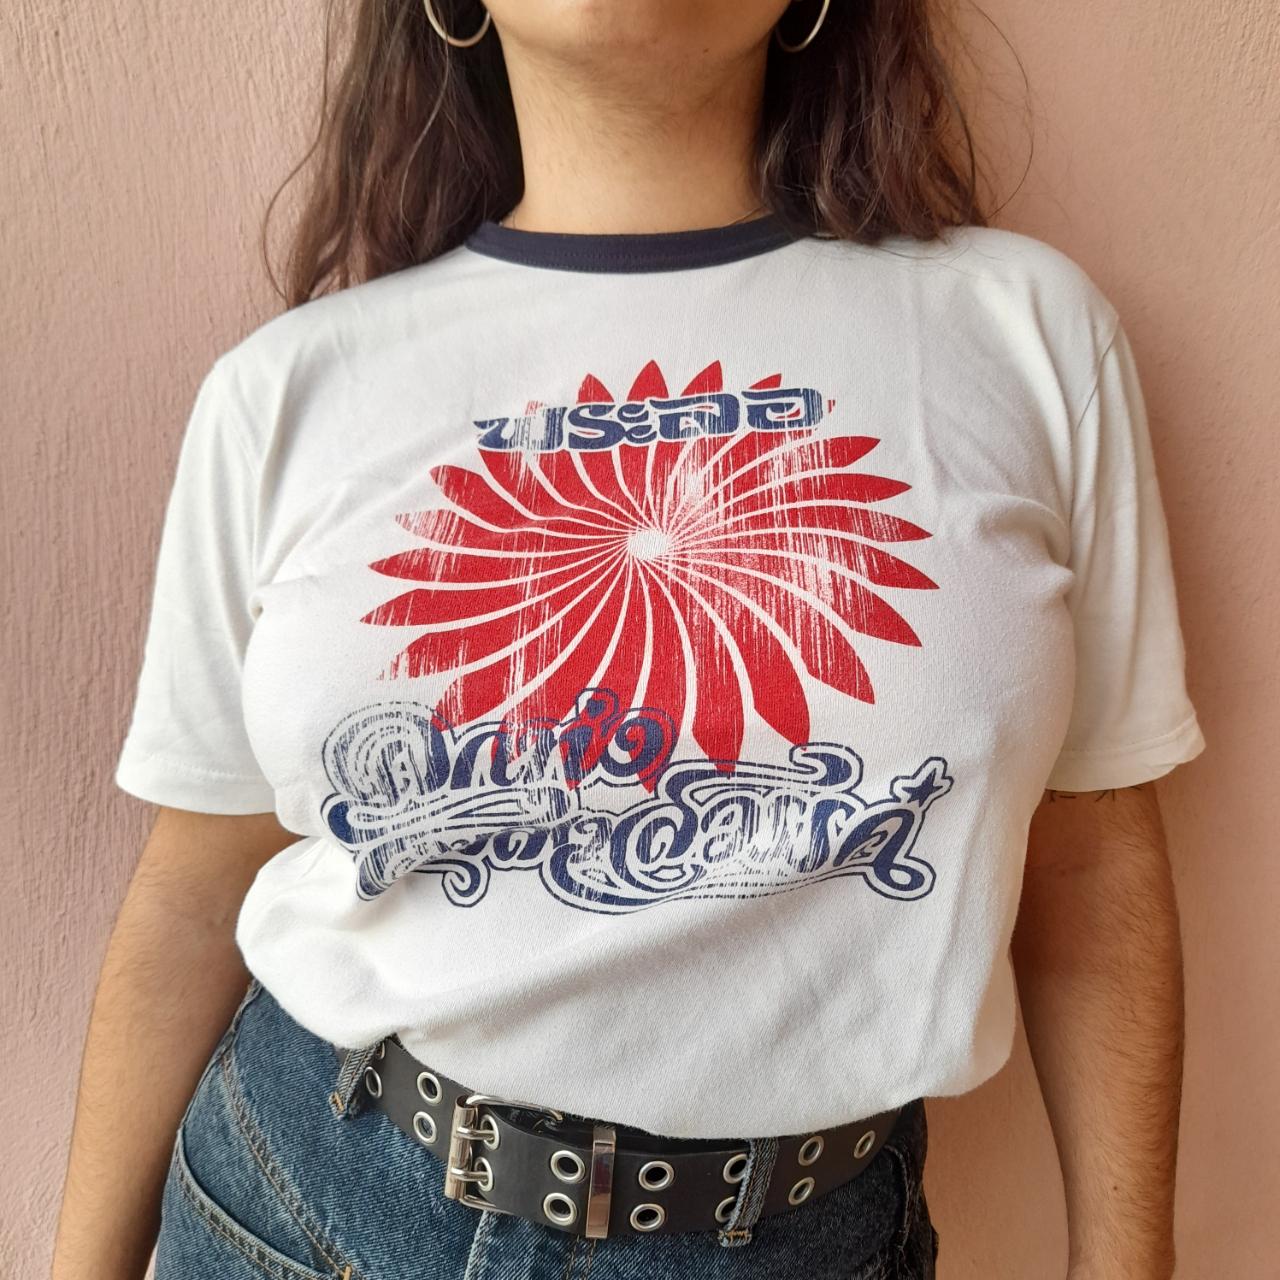 Cotton graphic t-shirt, with red and blue details.... - Depop